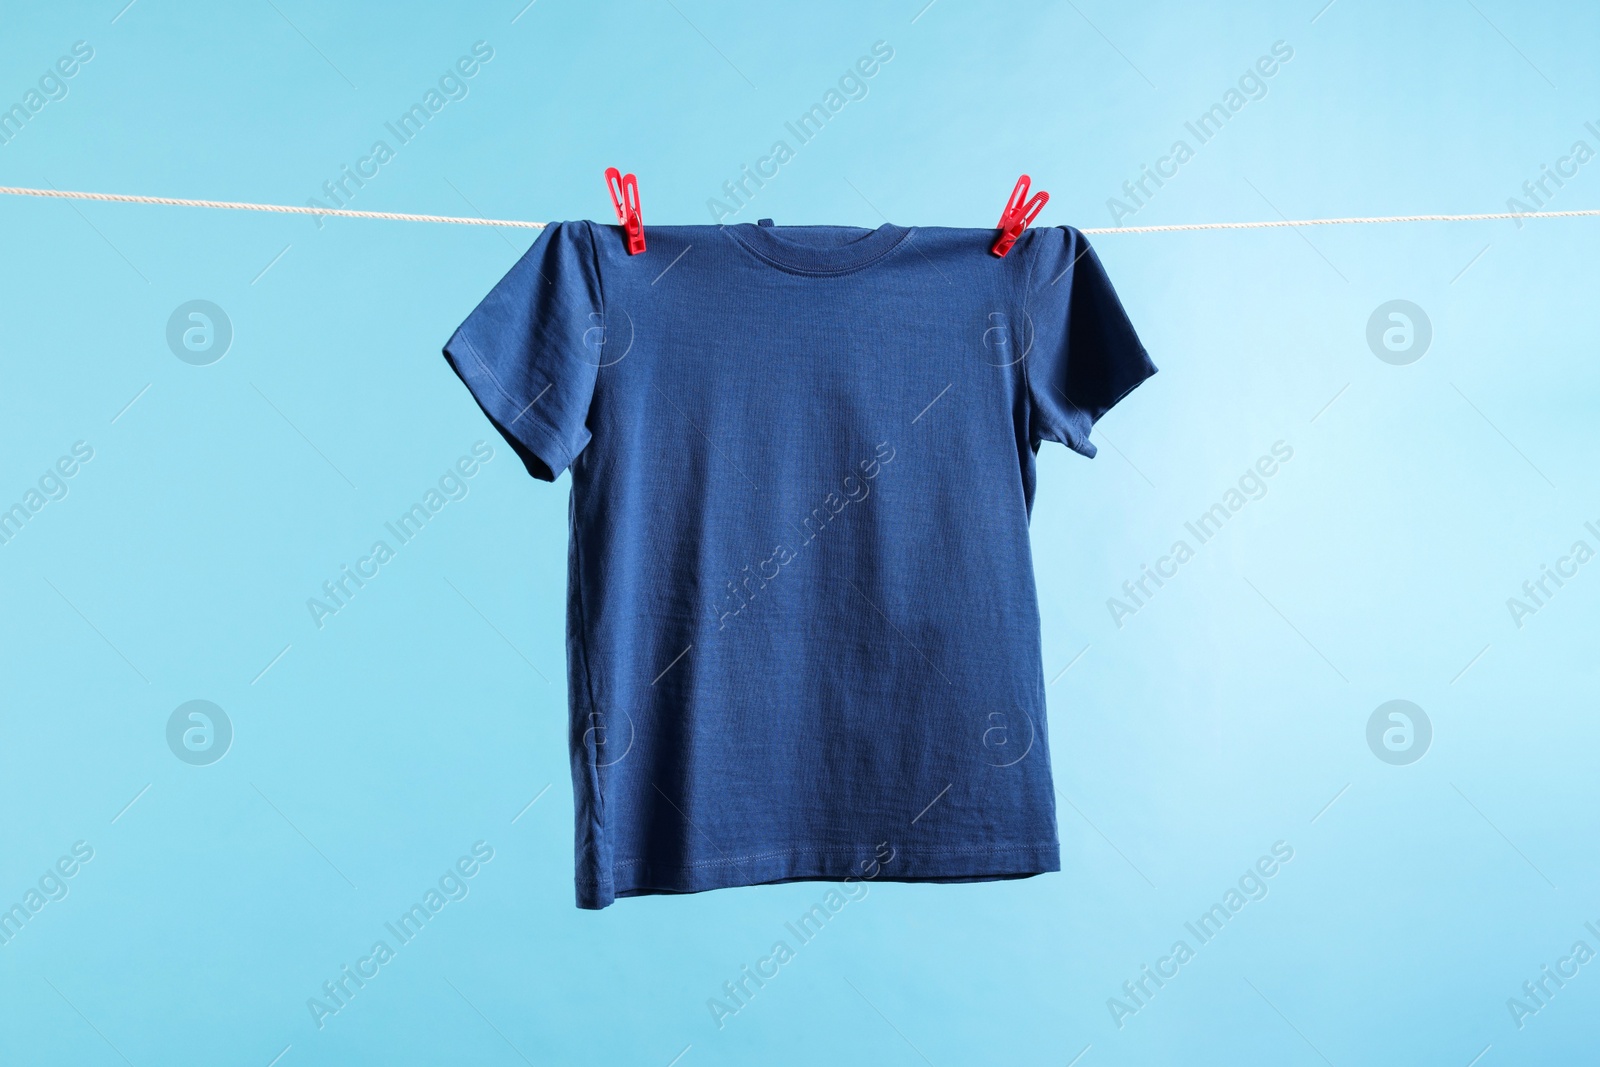 Photo of One t-shirt drying on washing line against light blue background